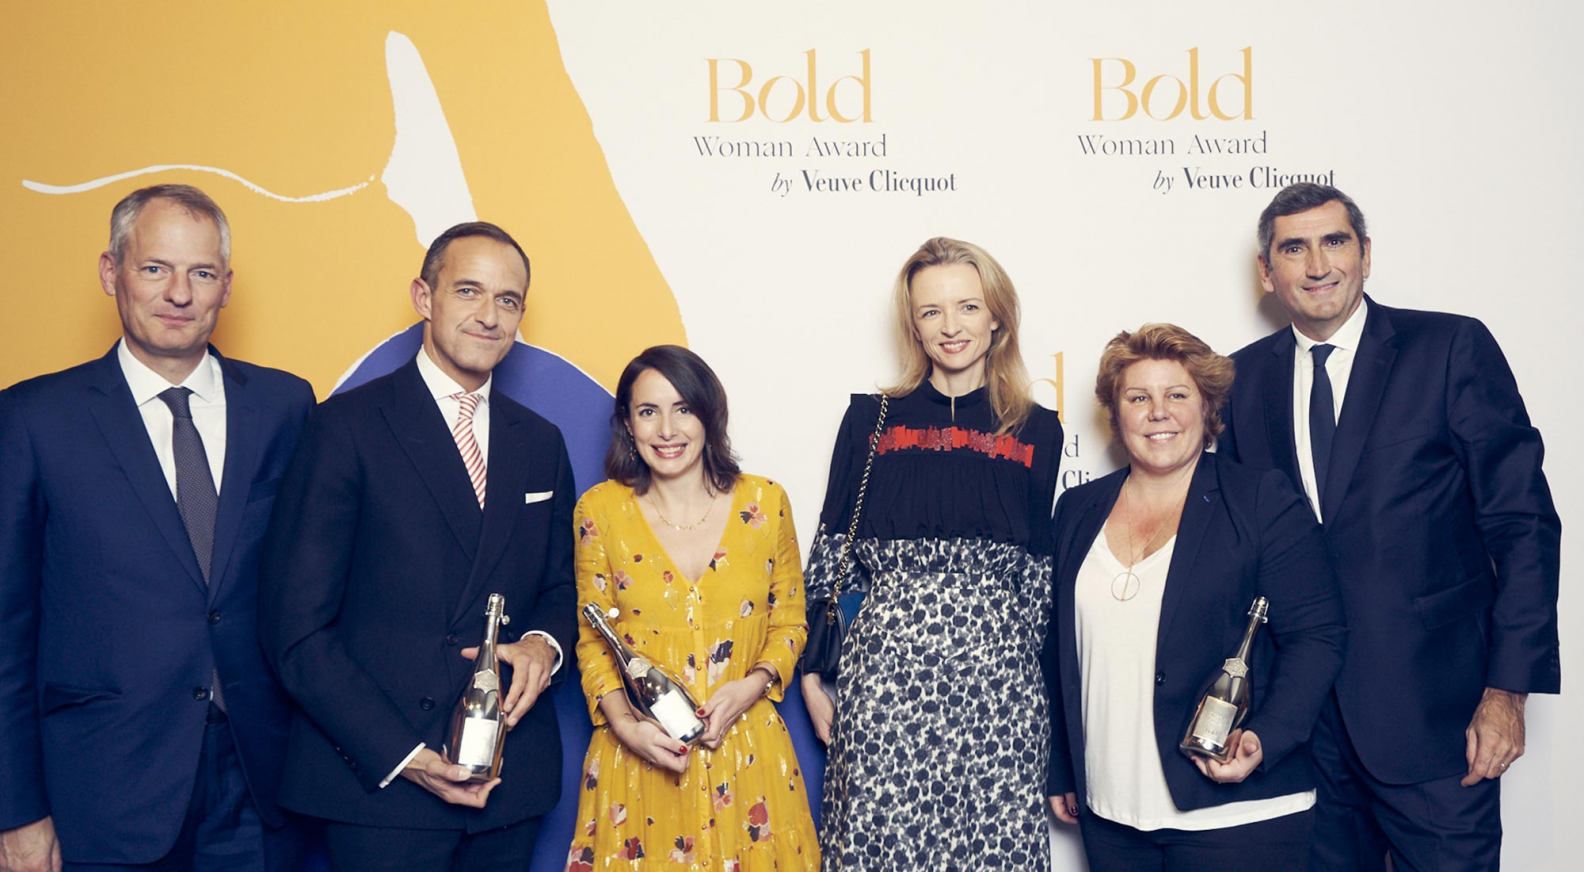 Veuve Clicquot presents Bold Woman Award to Chrystèle Gimaret and